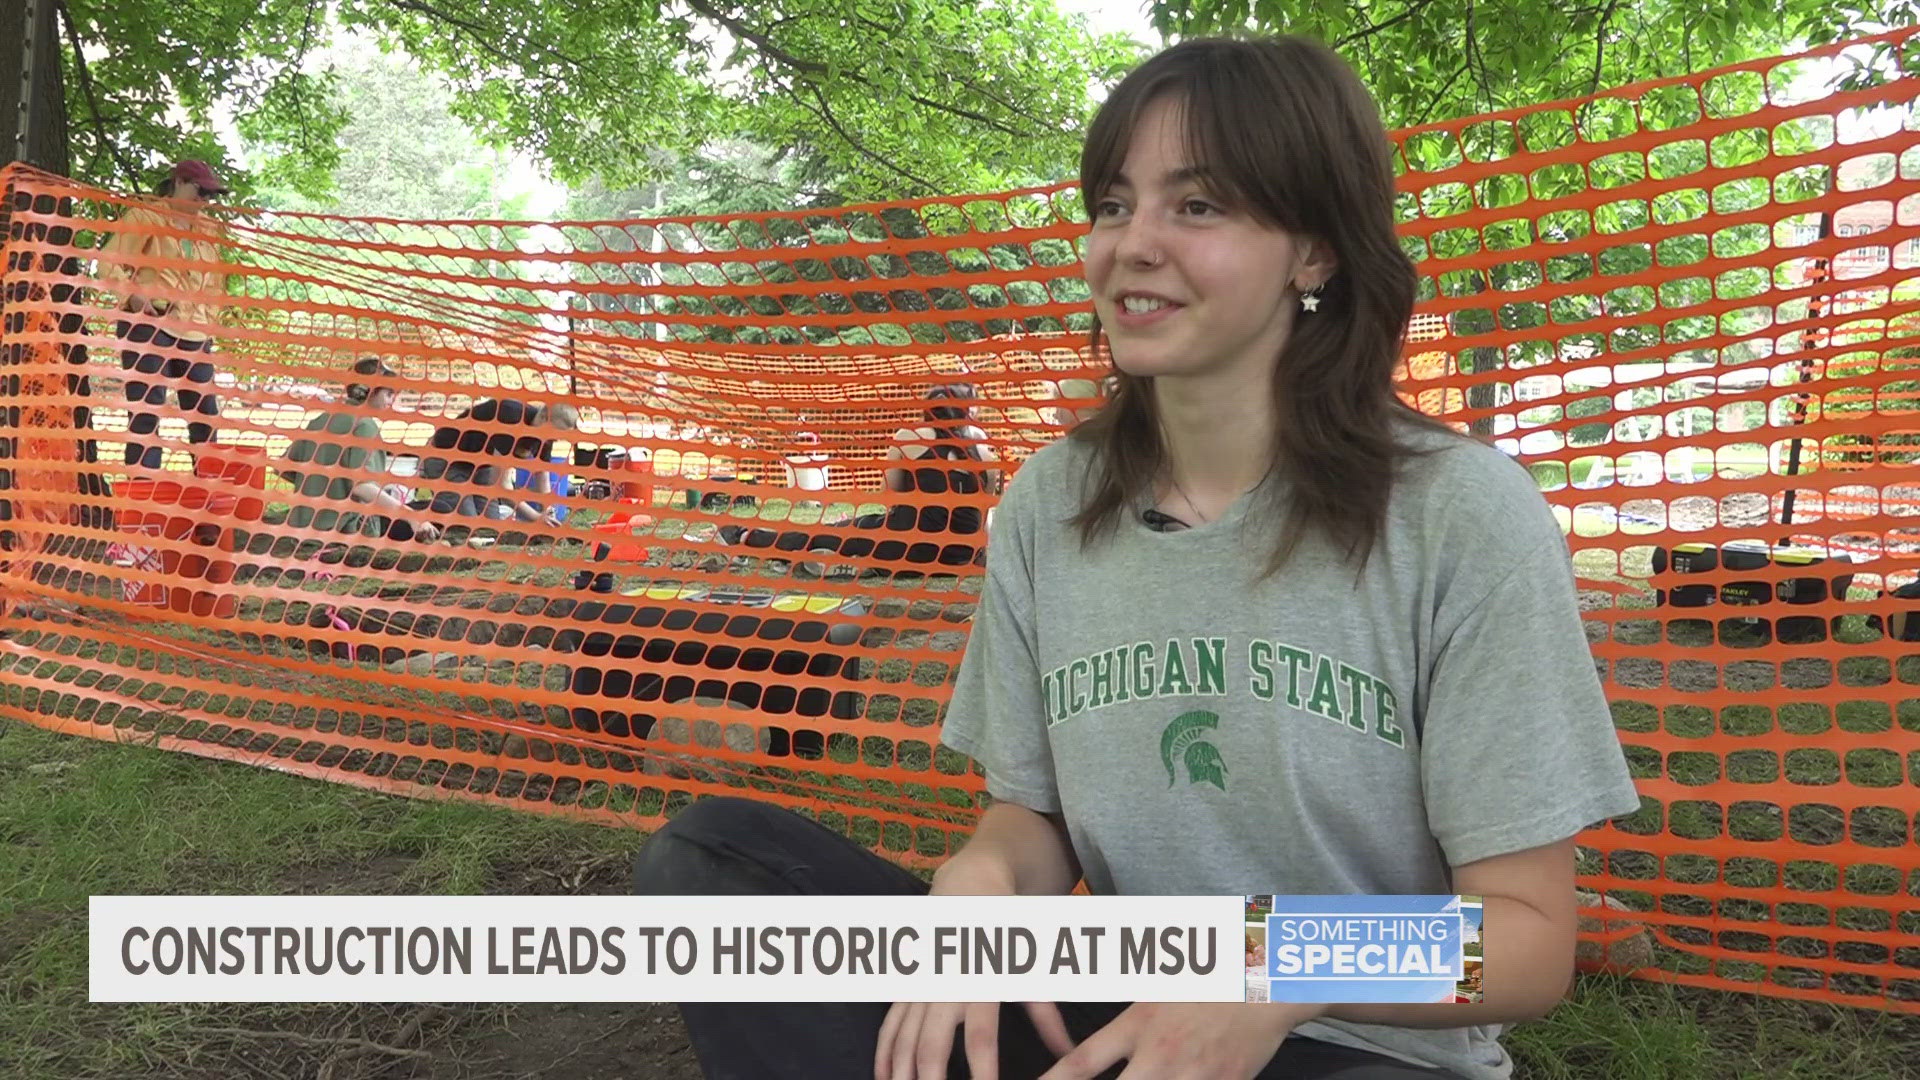 Thanks to this historic find, students are getting a once-in-a-lifetime chance to do an archaeological dig right from campus.